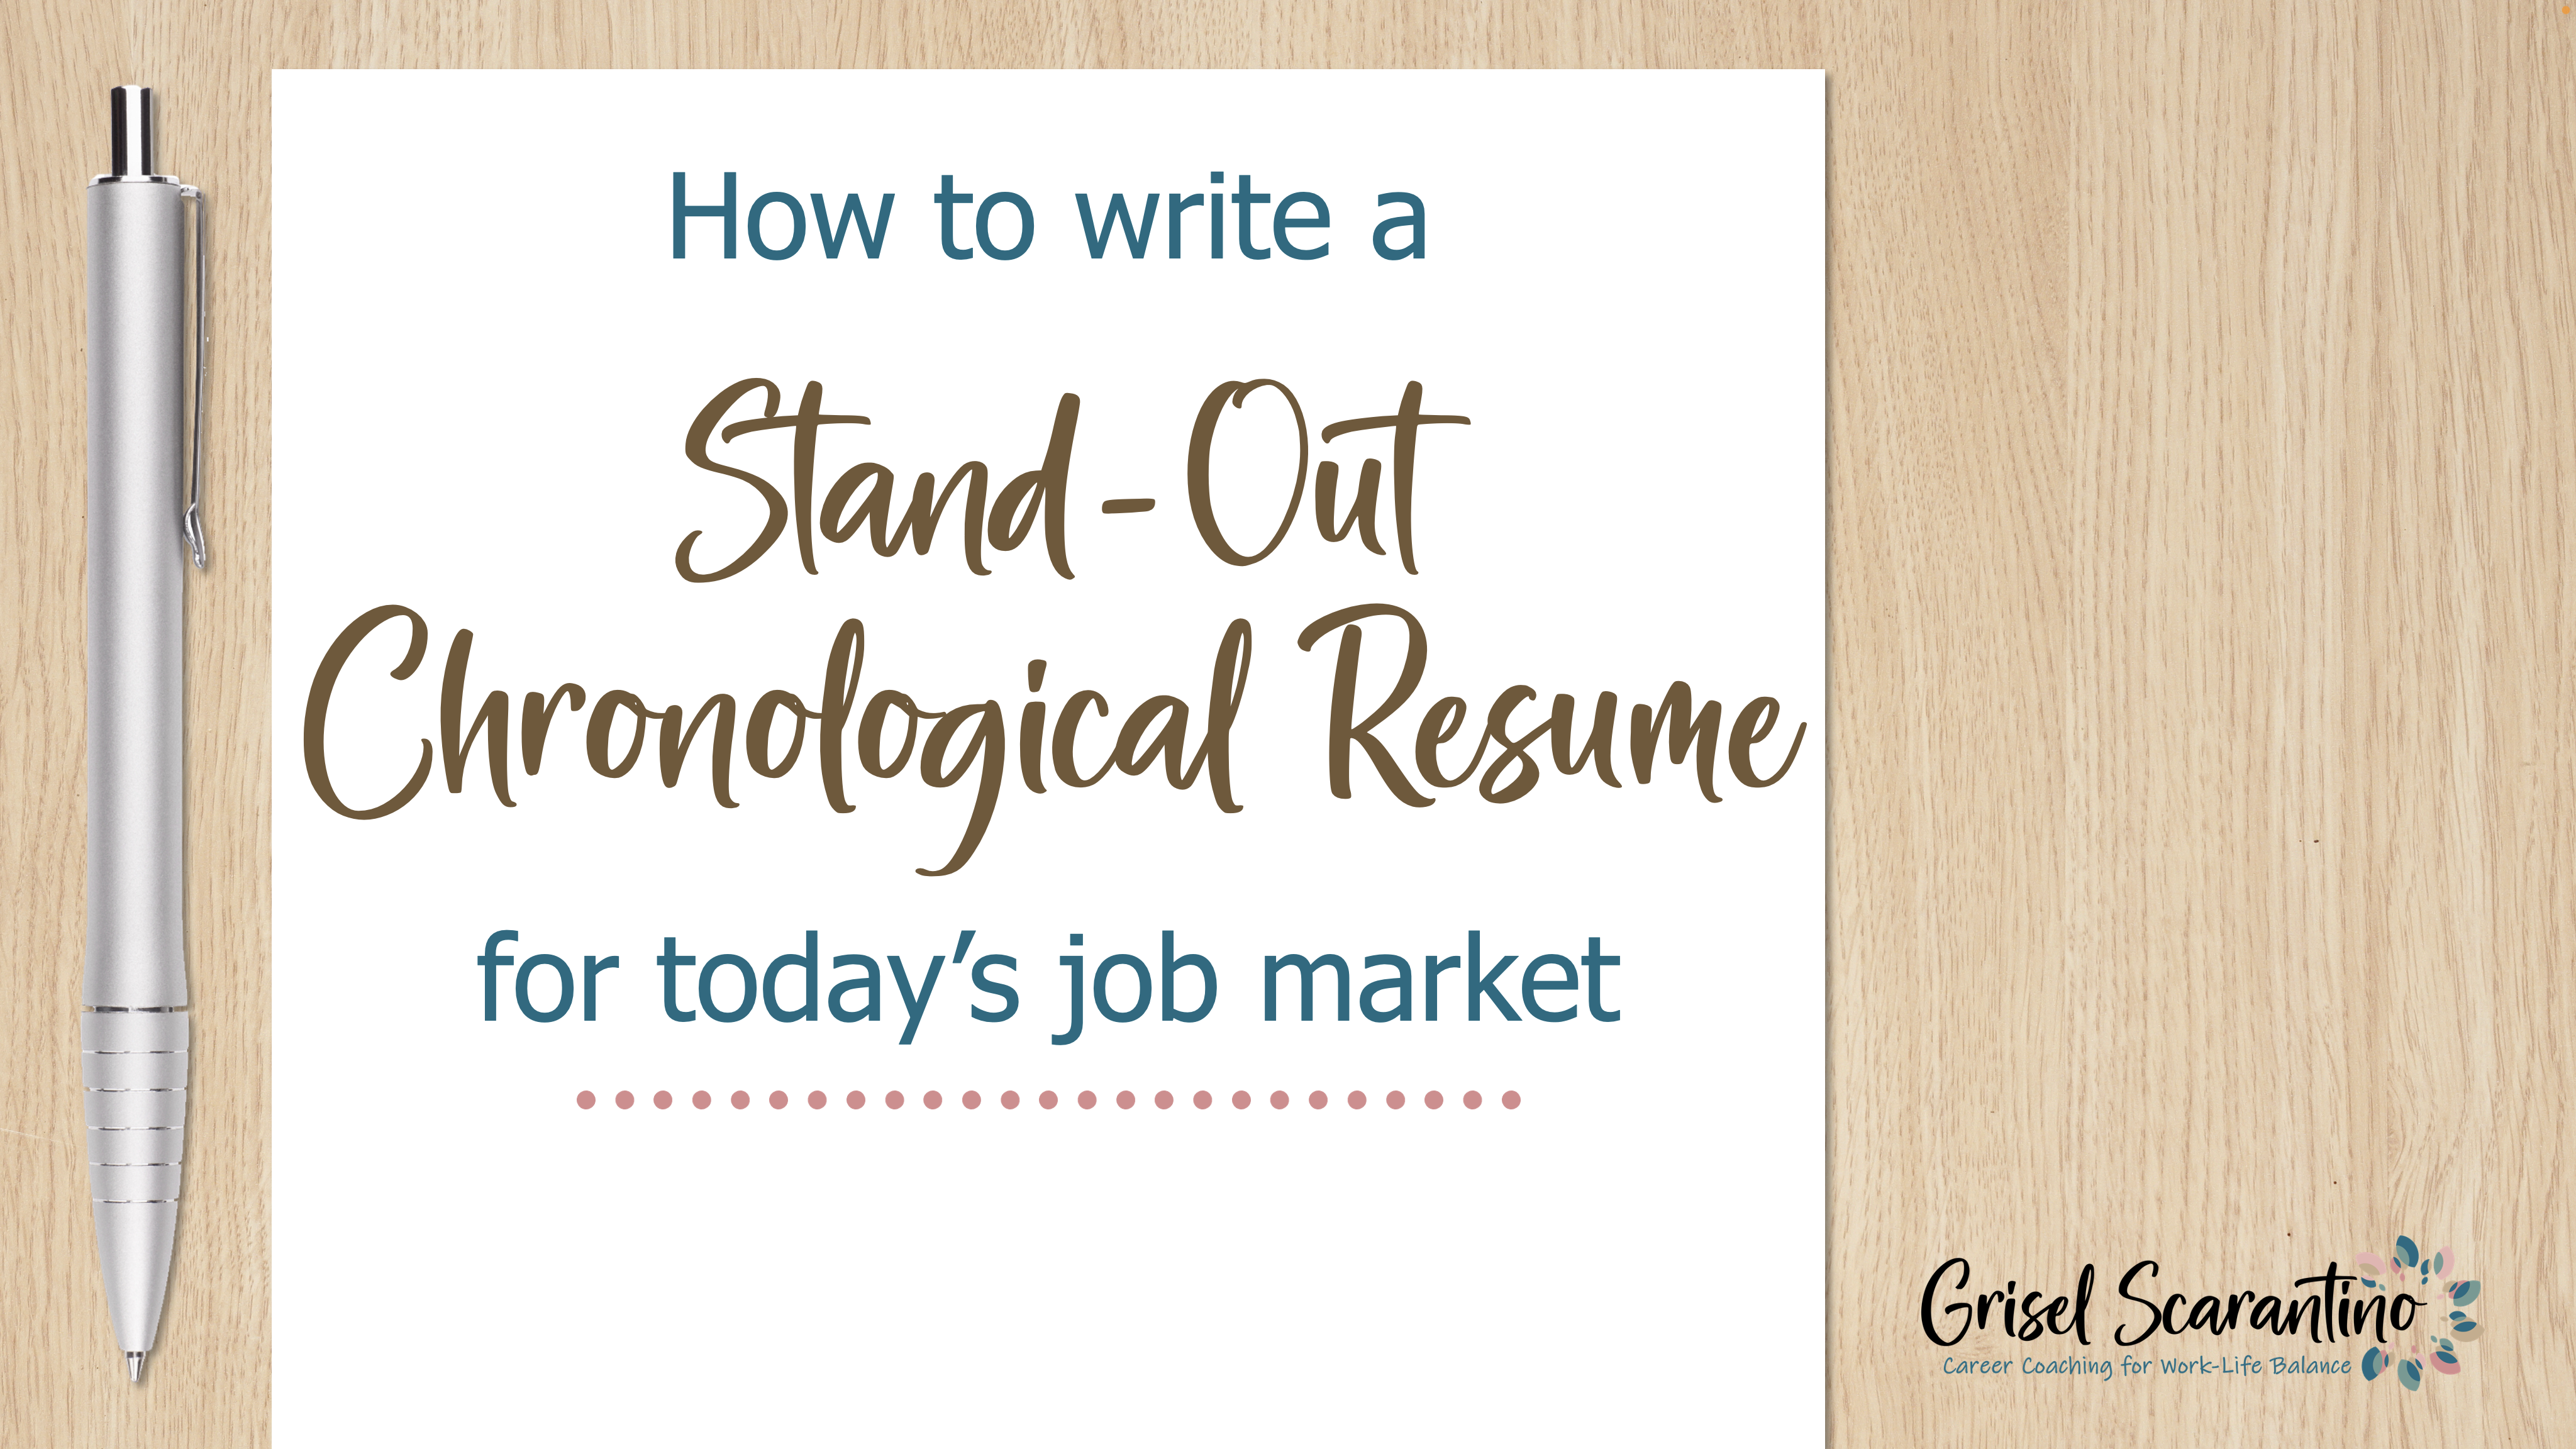 How to Write a Stand-Out Chronological Resume for Today